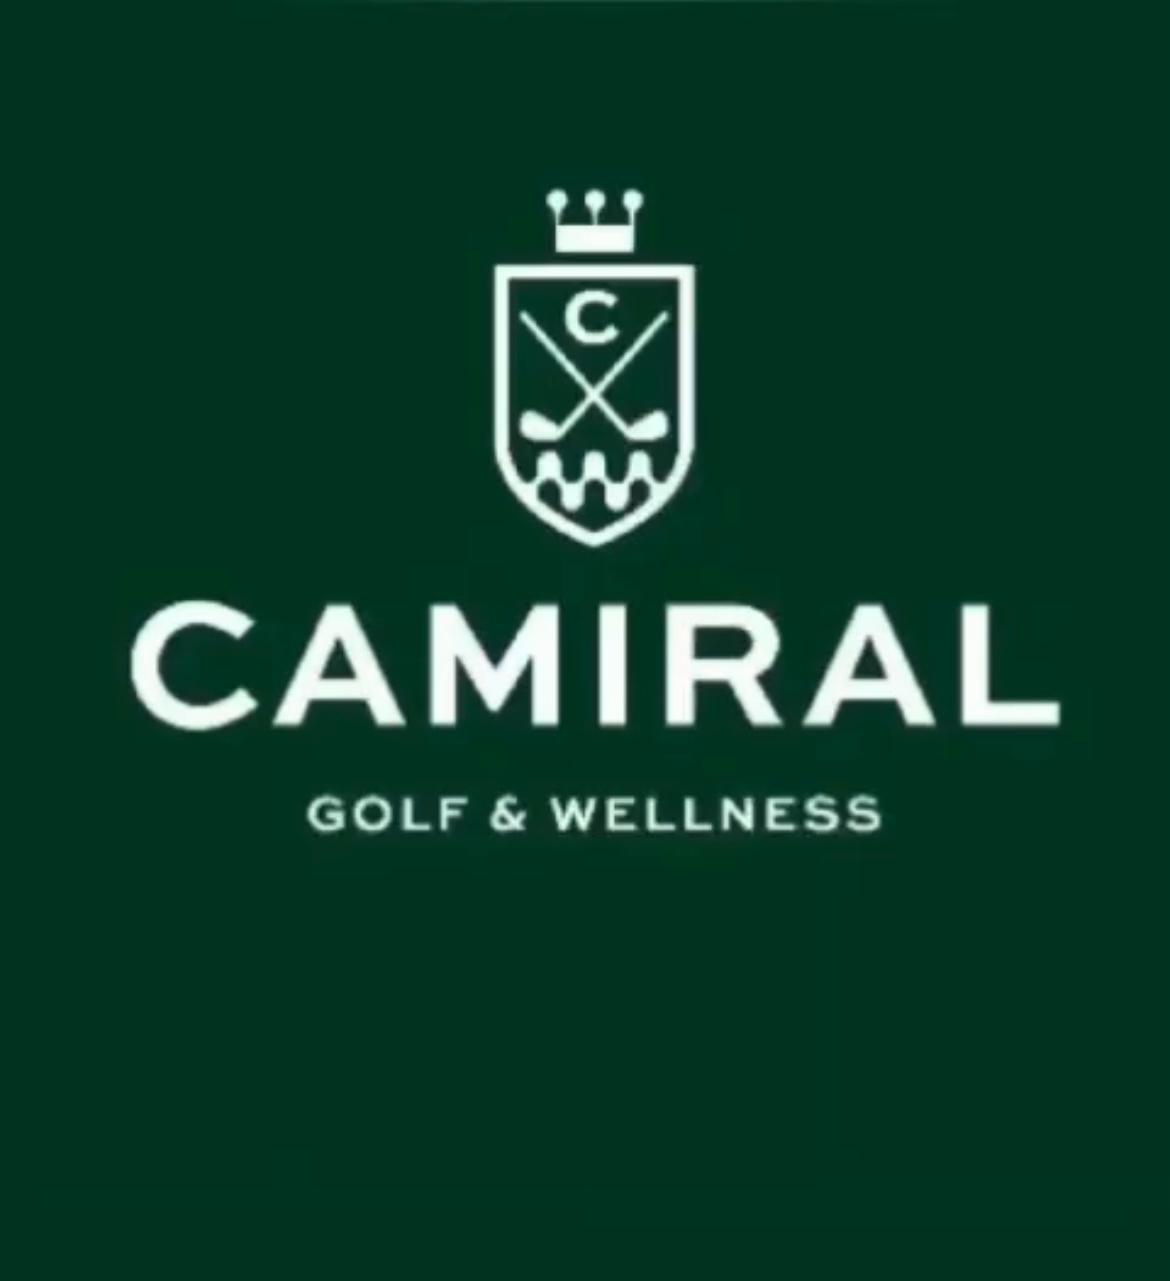 You are currently viewing Camiral Golf & Wellness – my review